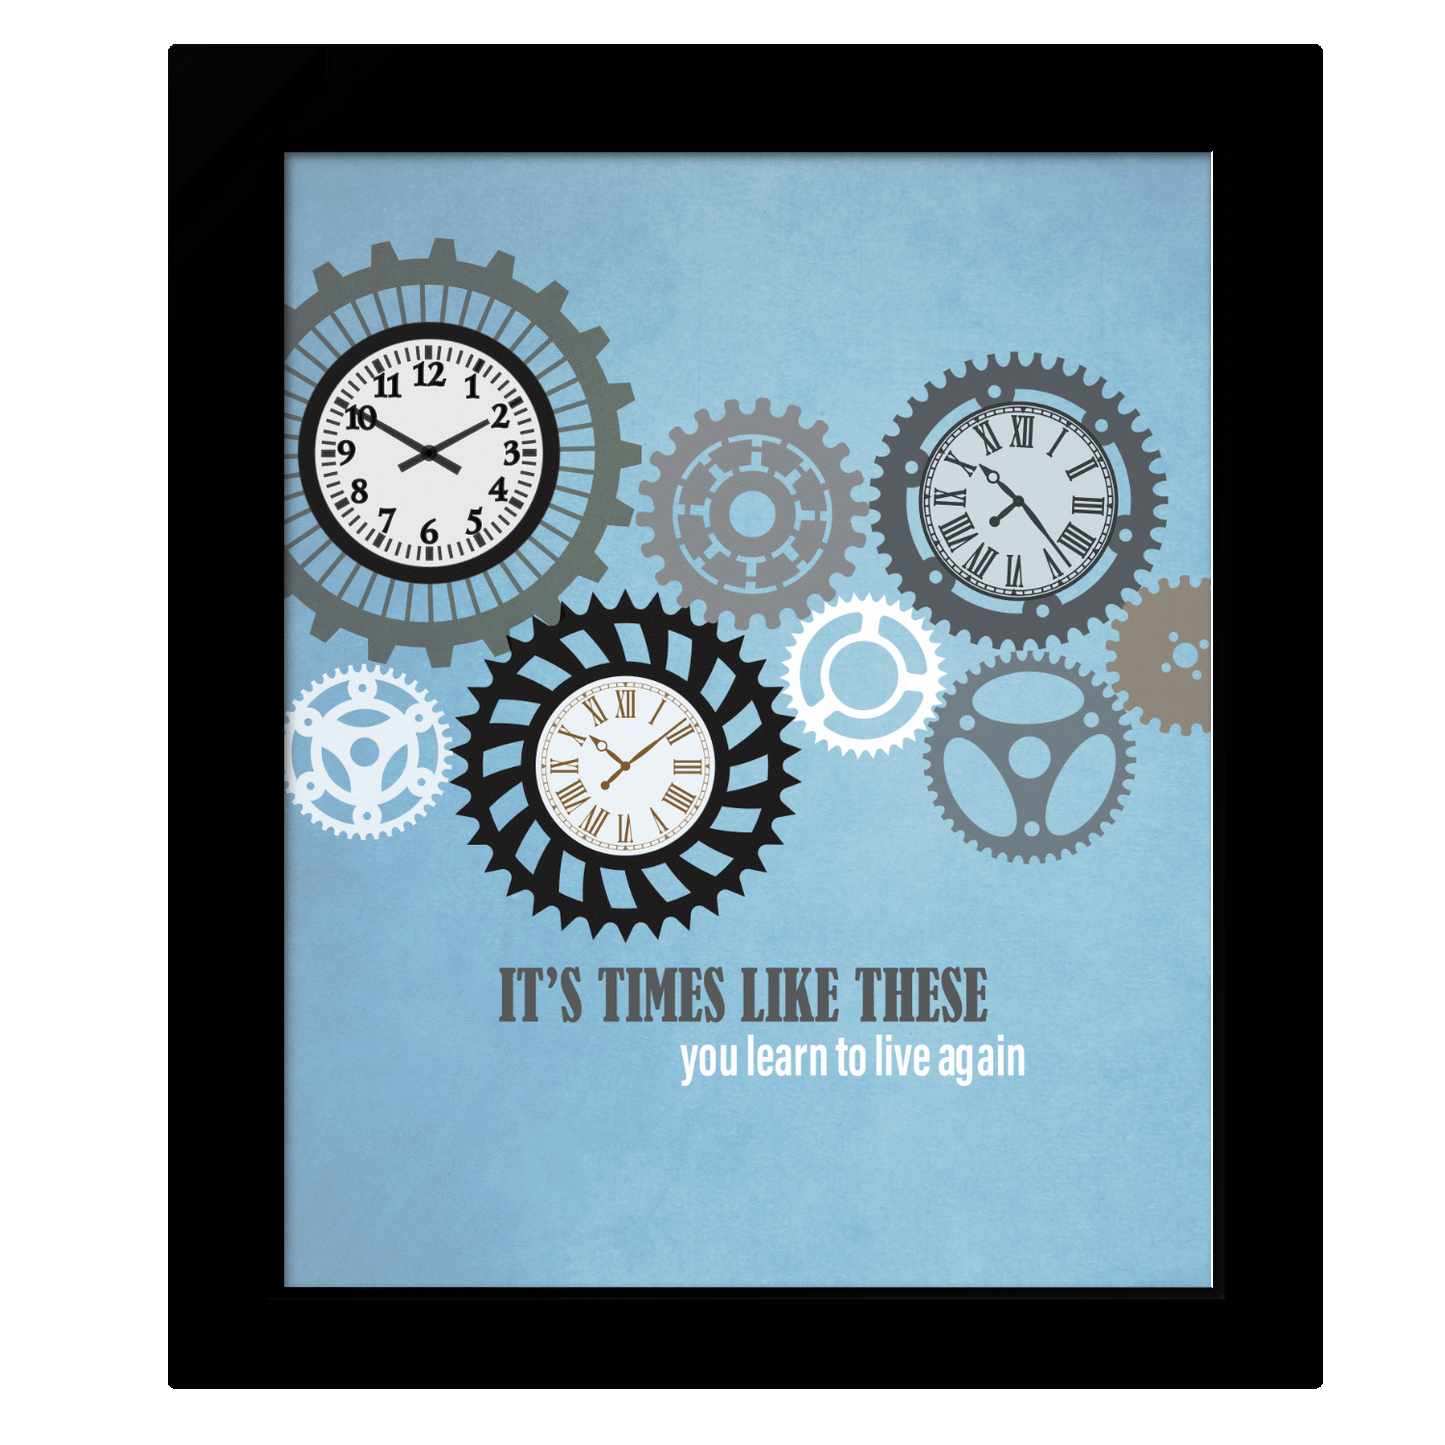 Times Like These by Foo Fighters - Song Lyric Art Print Song Lyrics Art Song Lyrics Art 